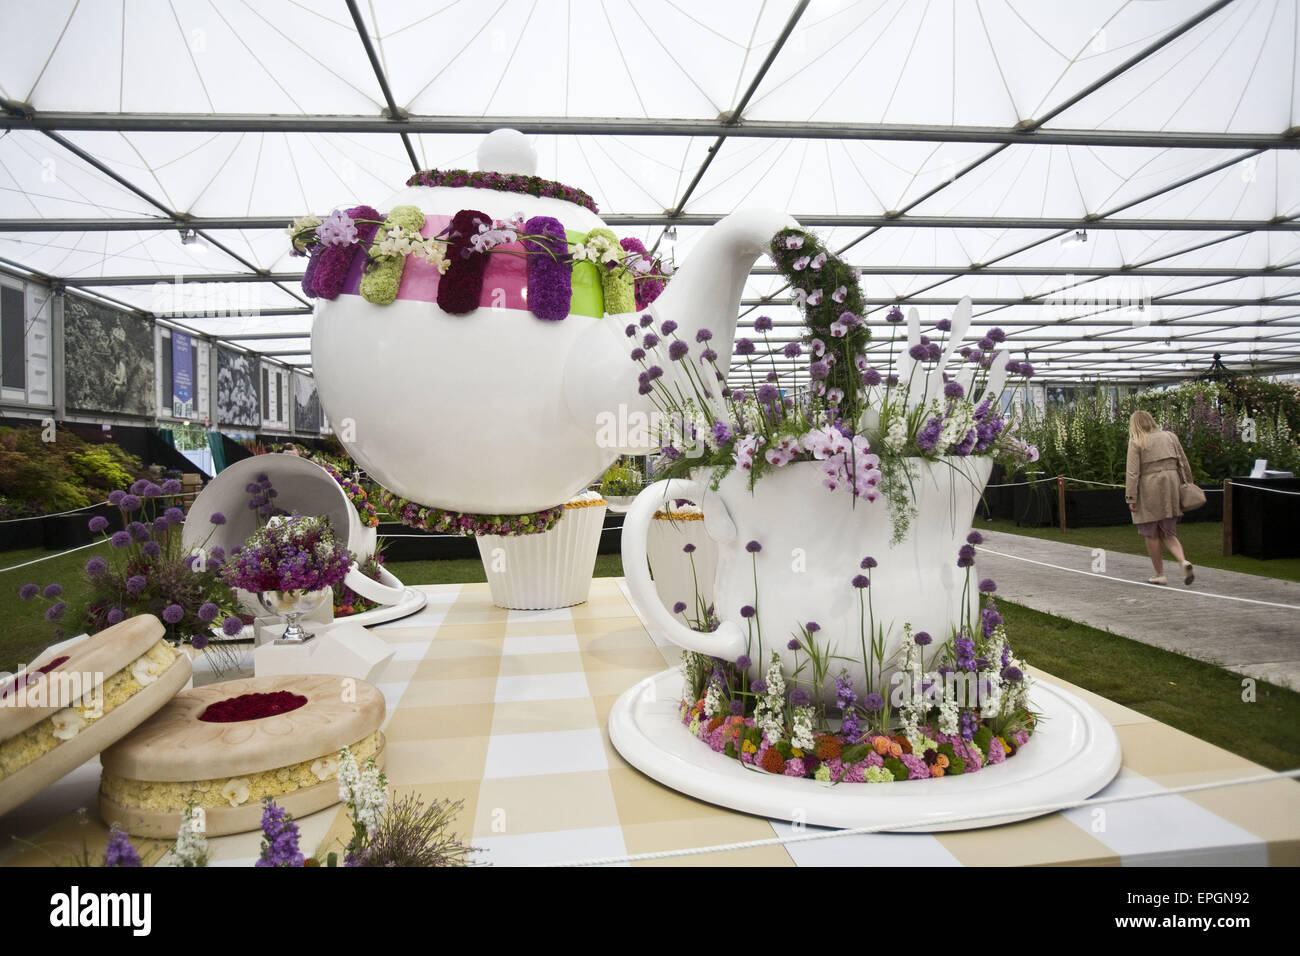 London, UK. 18th May, 2015. Interflora display features larger then life tea pot and a tea cup complete with muffins and buiscits. The Chelsea Flower Show organised by Royal Horticultural Society (RHS) in the grounds of the Royal Hospital Chelsea every May, is the most famous flower show in the United Kingdom, perhaps in the world. It attracts exhibitors and visitors from around the world, London, UK. Credit:  Veronika Lukasova/ZUMA Wire/Alamy Live News Stock Photo